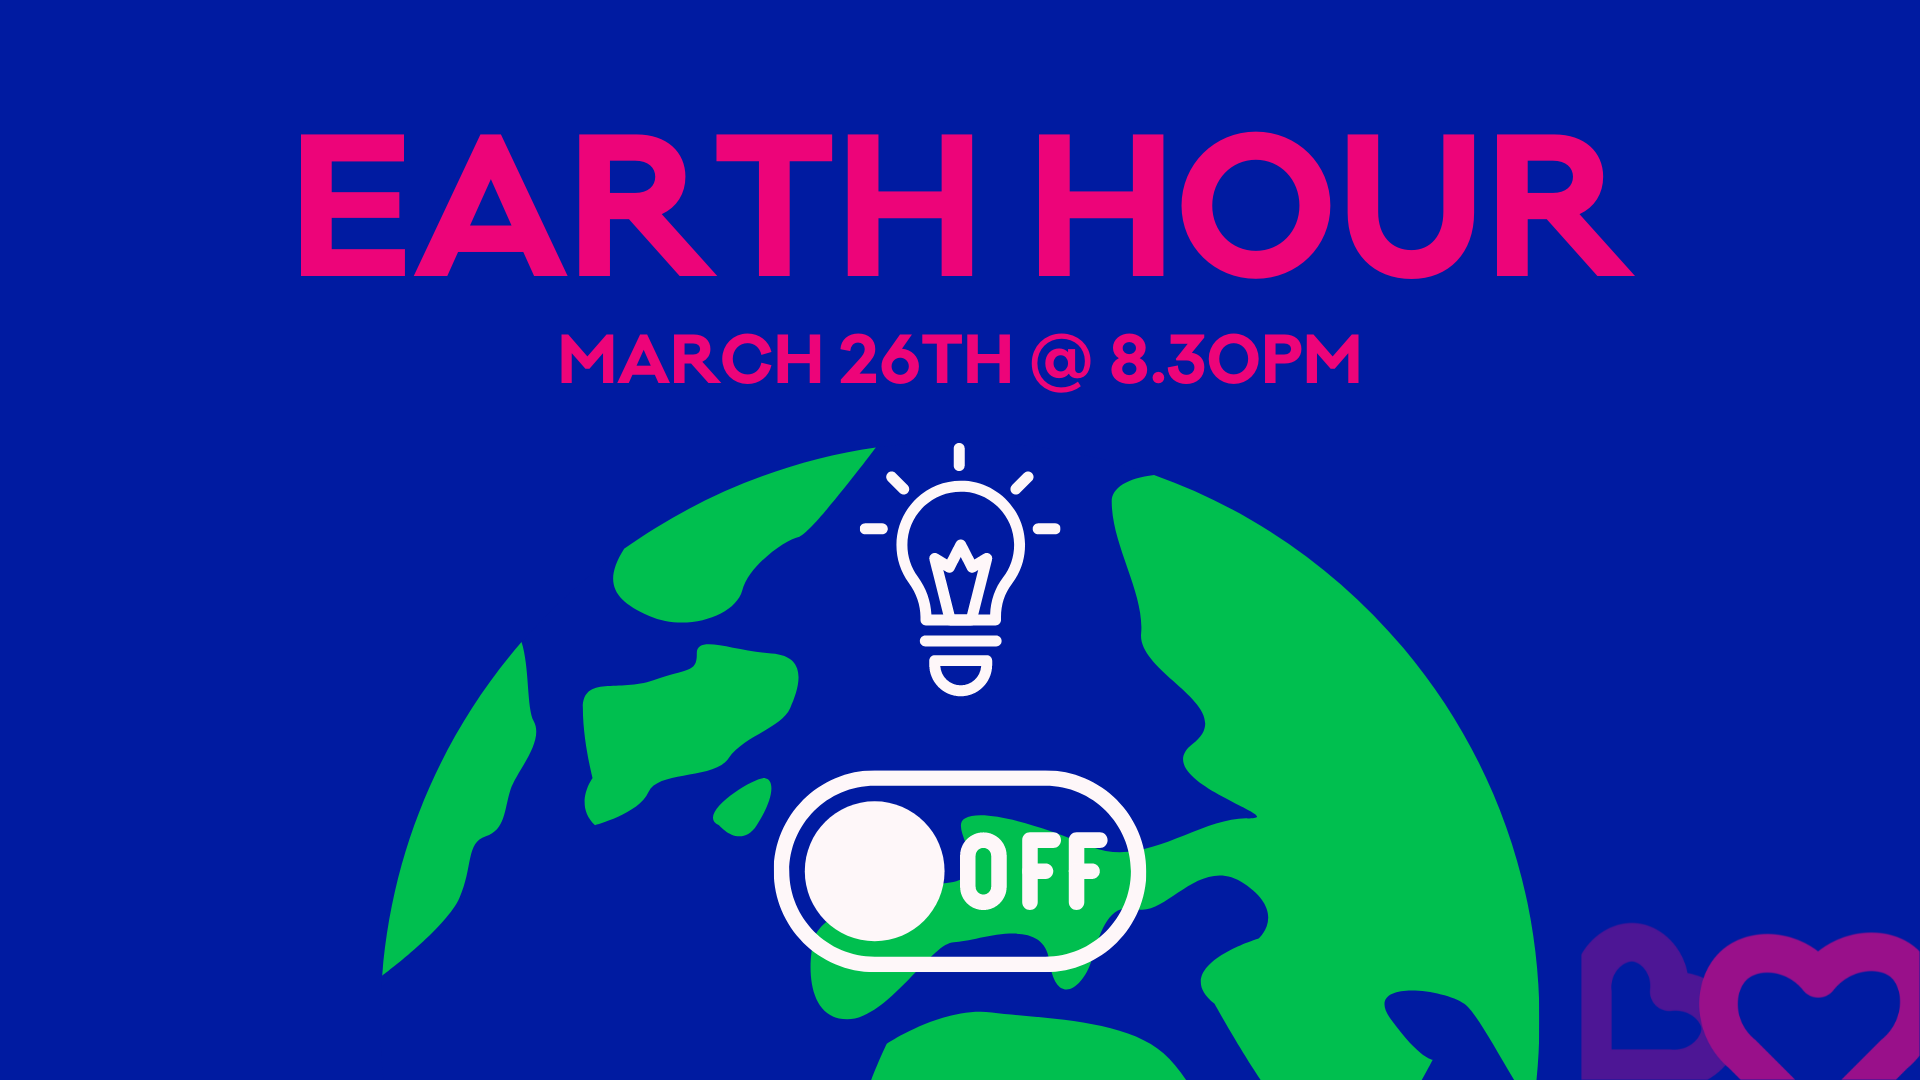 Earth hour poster